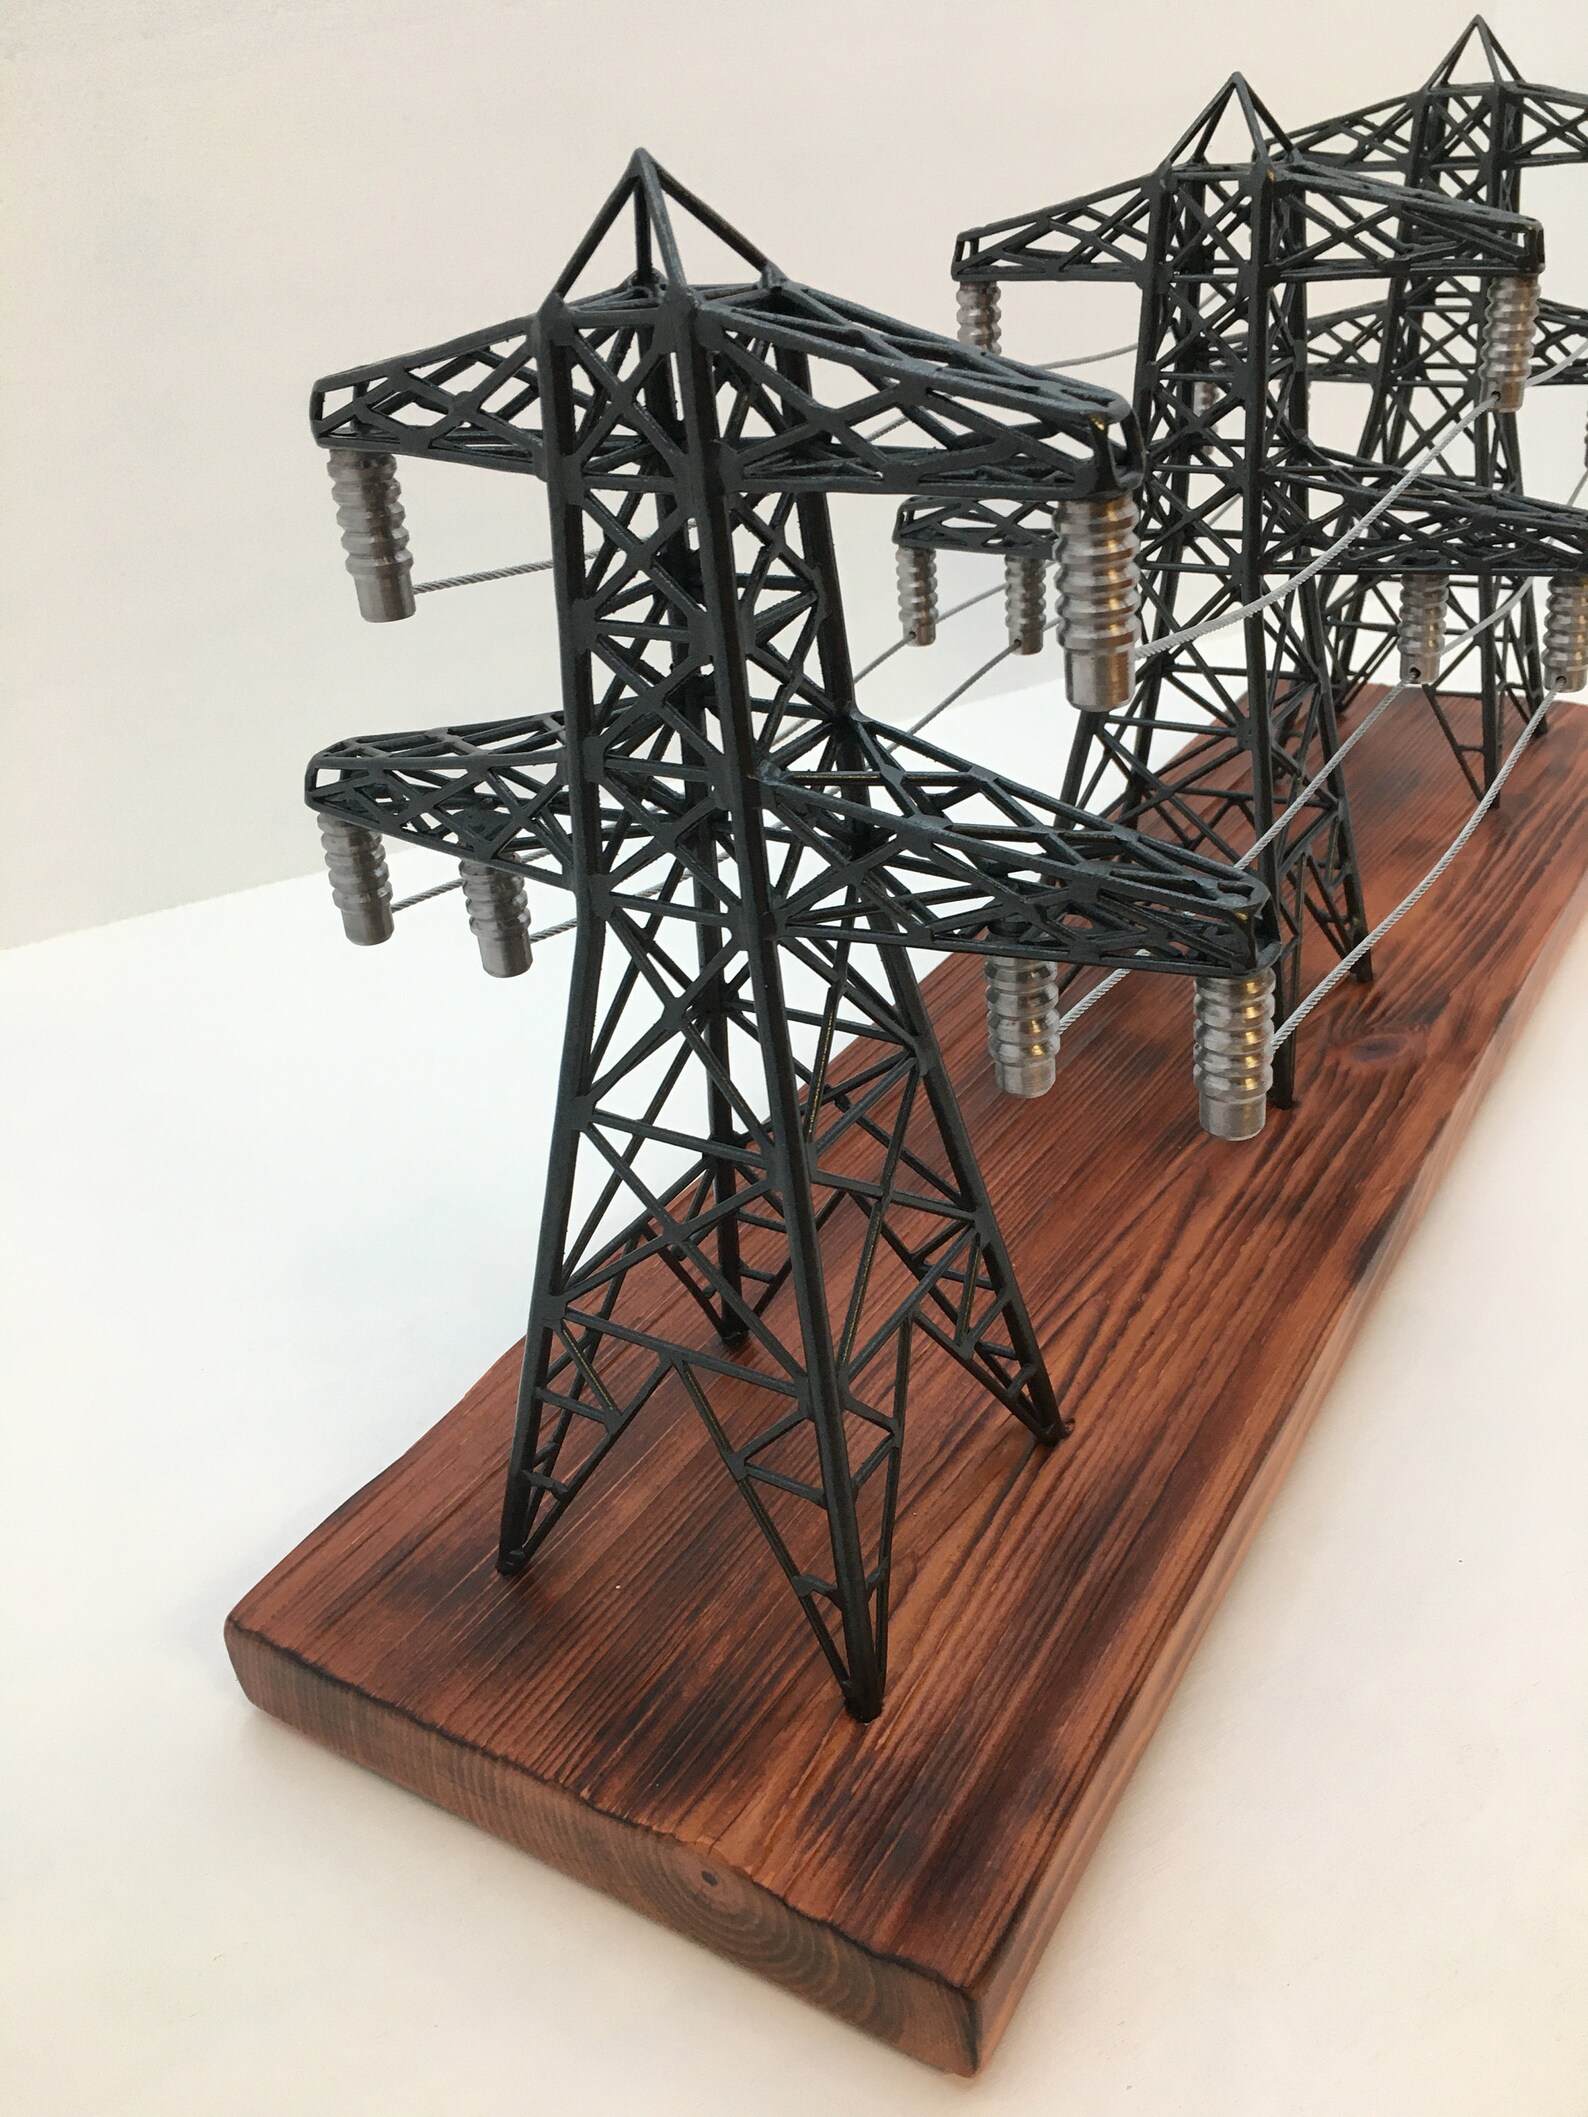 Model High Voltage Power Line Towers | Etsy